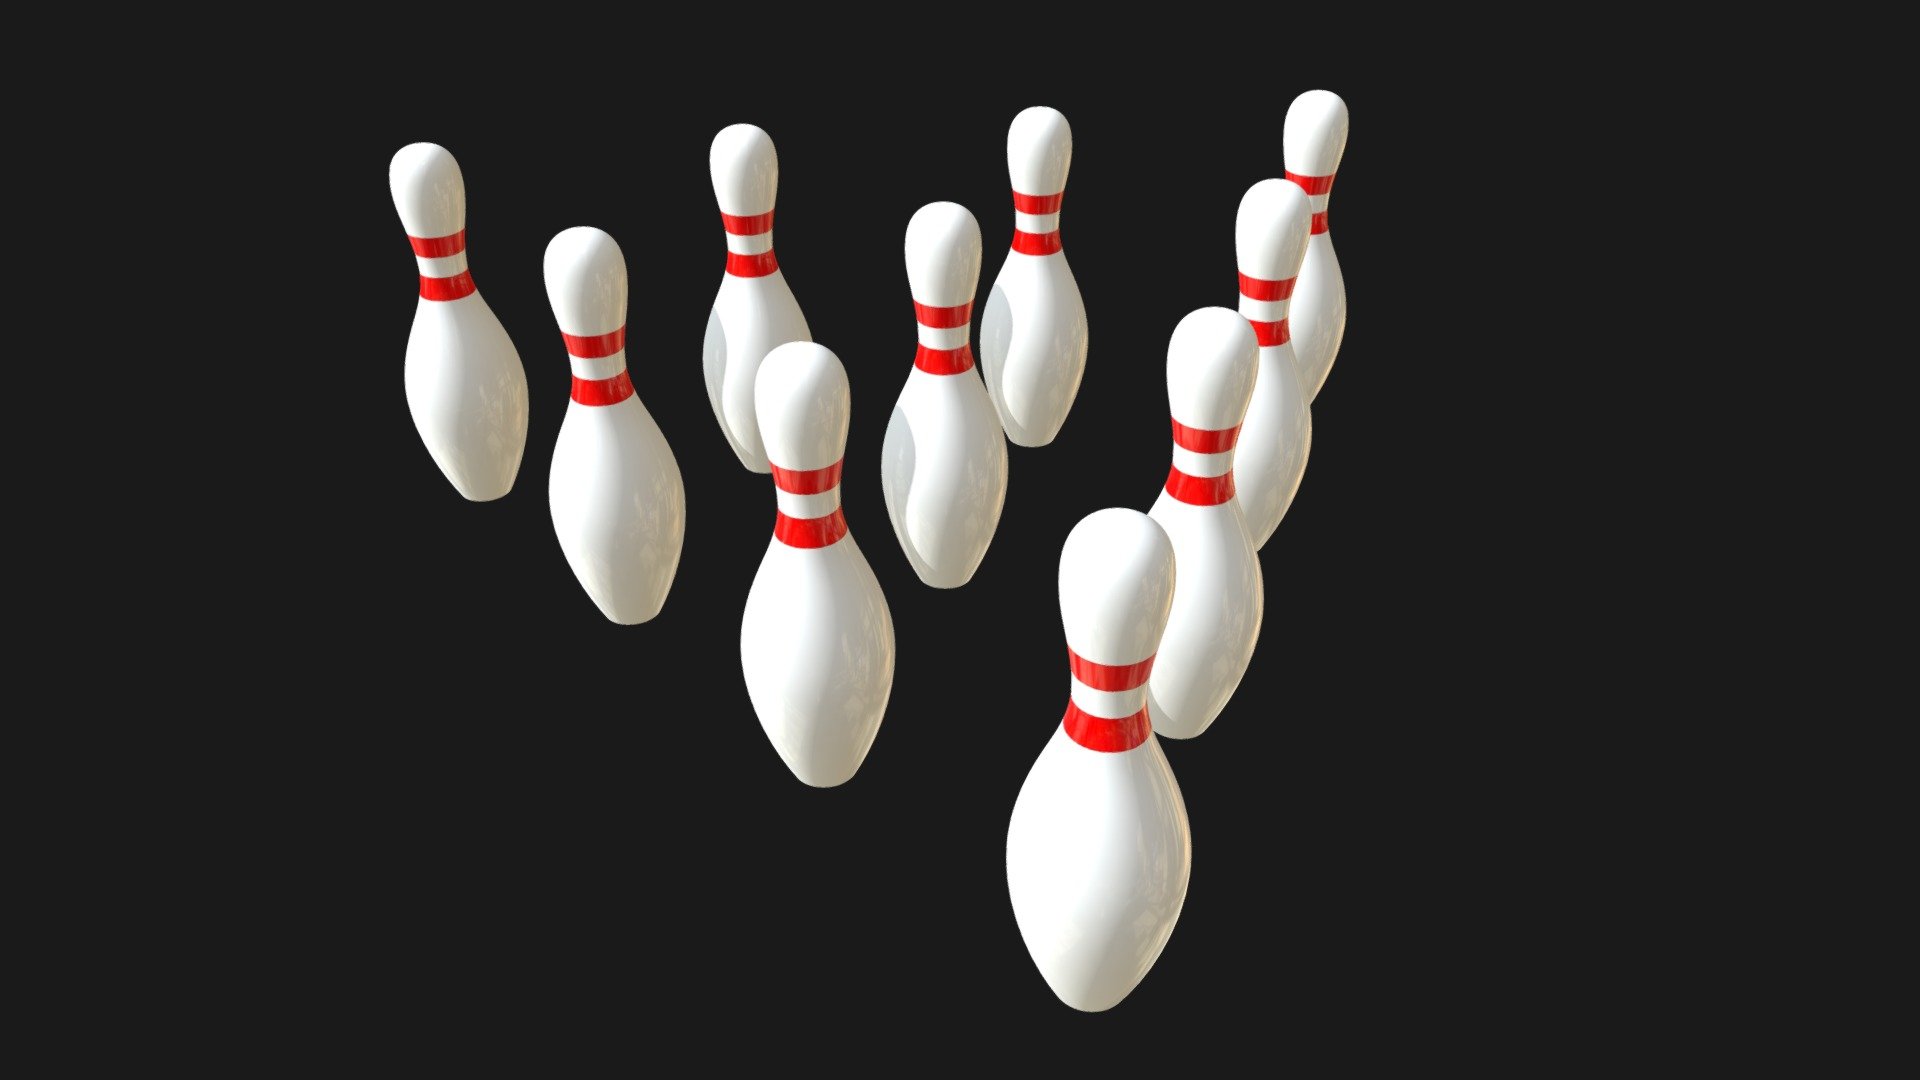 === The following description refers to the additional ZIP package provided with this model ===

10 bowling pins 3D Models, with real dimensions and distances (relative positions). 10 individual objects sharing the same non overlapping UV Layout map, Material and PBR Textures set. Production-ready 3D Model, with PBR materials, textures, non overlapping UV Layout map provided in the package.

Quads only geometries (no tris/ngons).

Formats included: FBX, OBJ; scenes: BLEND (with Cycles / Eevee PBR Materials and Textures); other: 16-bit PNGs with Alpha.

10 Objects (meshes), 1 PBR Material, UV unwrapped (non overlapping UV Layout map provided in the package); UV-mapped Textures.

UV Layout maps and Image Textures resolutions: 2048x2048; PBR Textures made with Substance Painter.

Polygonal, QUADS ONLY (no tris/ngons); 53580 vertices, 53560 quad faces (107120 tris).

Real world dimensions; scene scale units: cm in Blender 3.3 (that is: Metric with 0.01 scale).

Uniform scale object (scale applied in Blender 3.3) 3d model